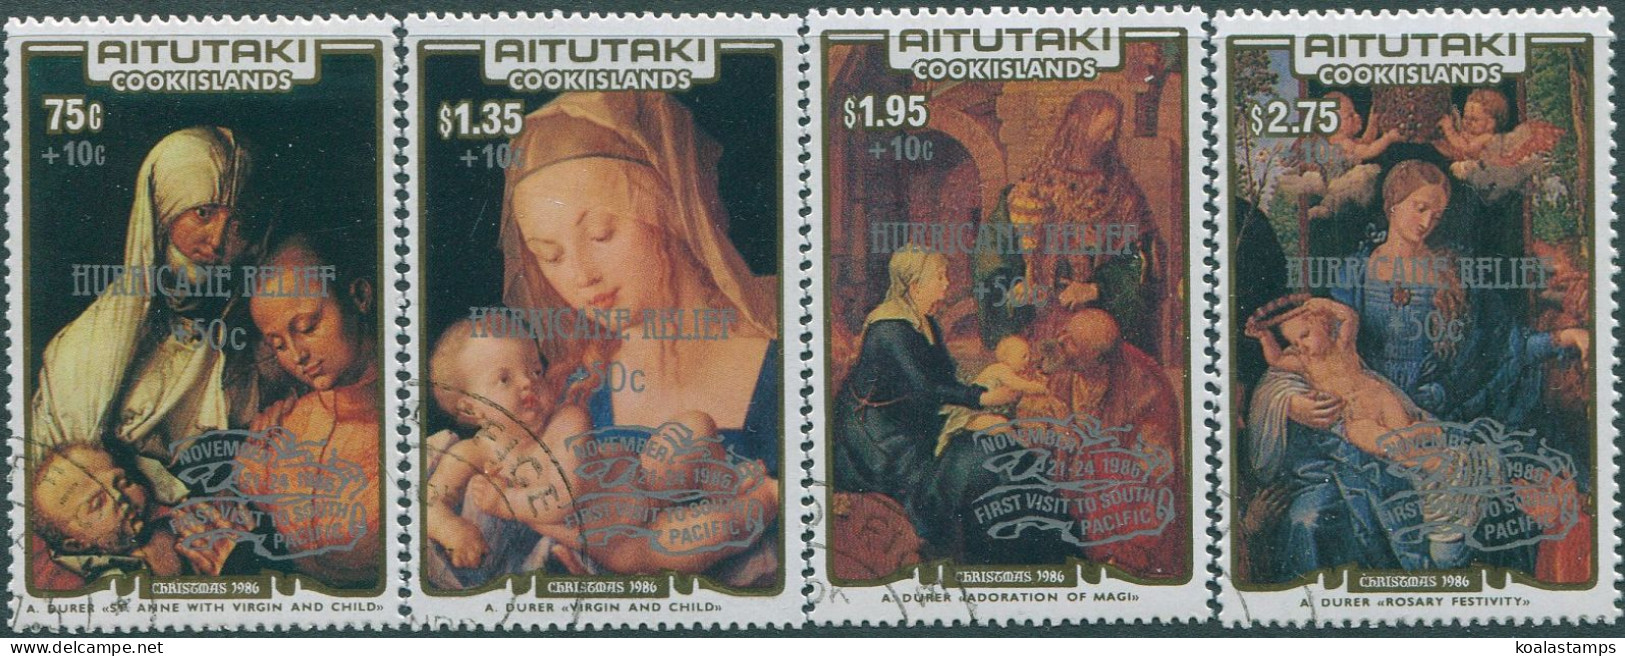 Aitutaki 1986 SG562-571 Christmas Hurricane Relief With Papal Visit Ovpt Set FU - Islas Cook